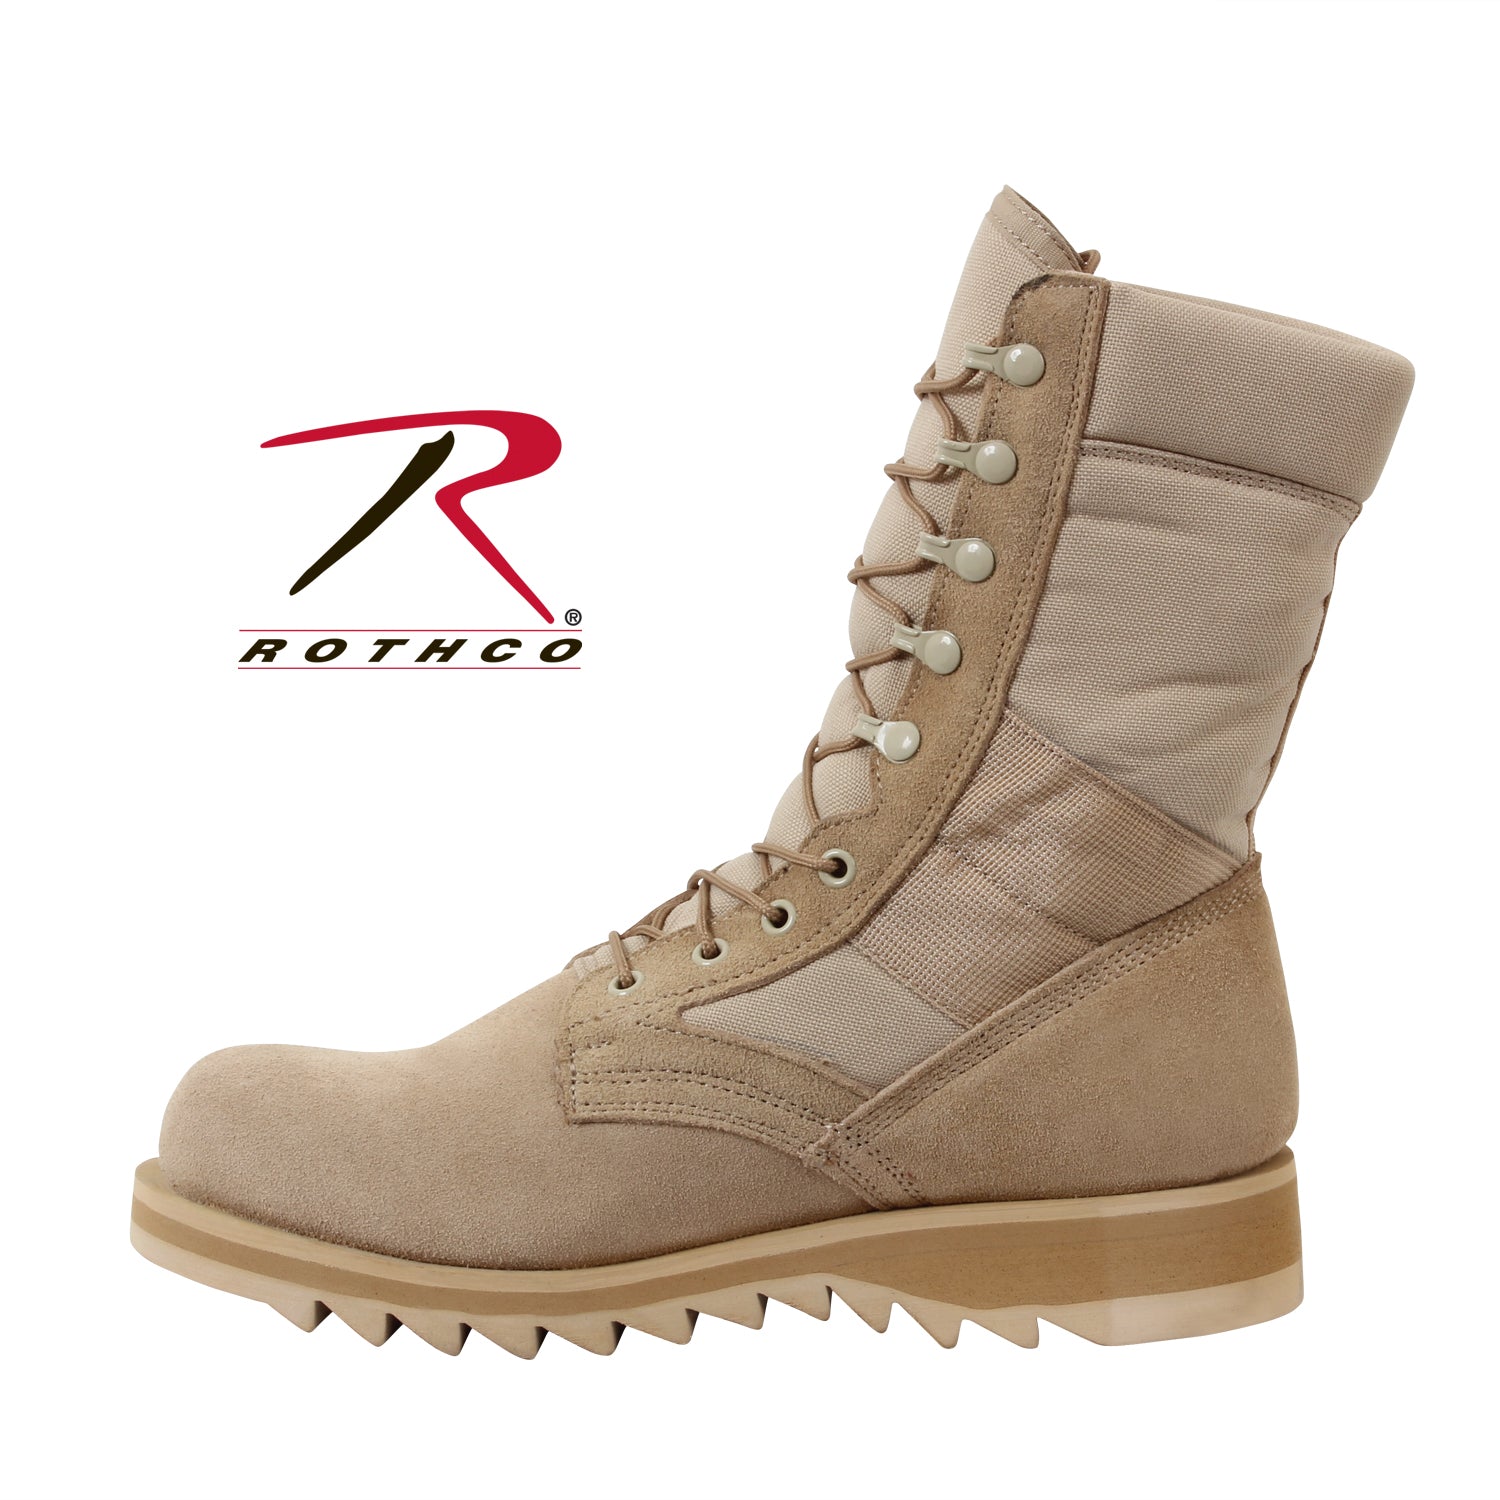 Rothco G.I. Type Ripple Sole Desert Tan Jungle Boots - 10 Inch - Tactical Choice Plus